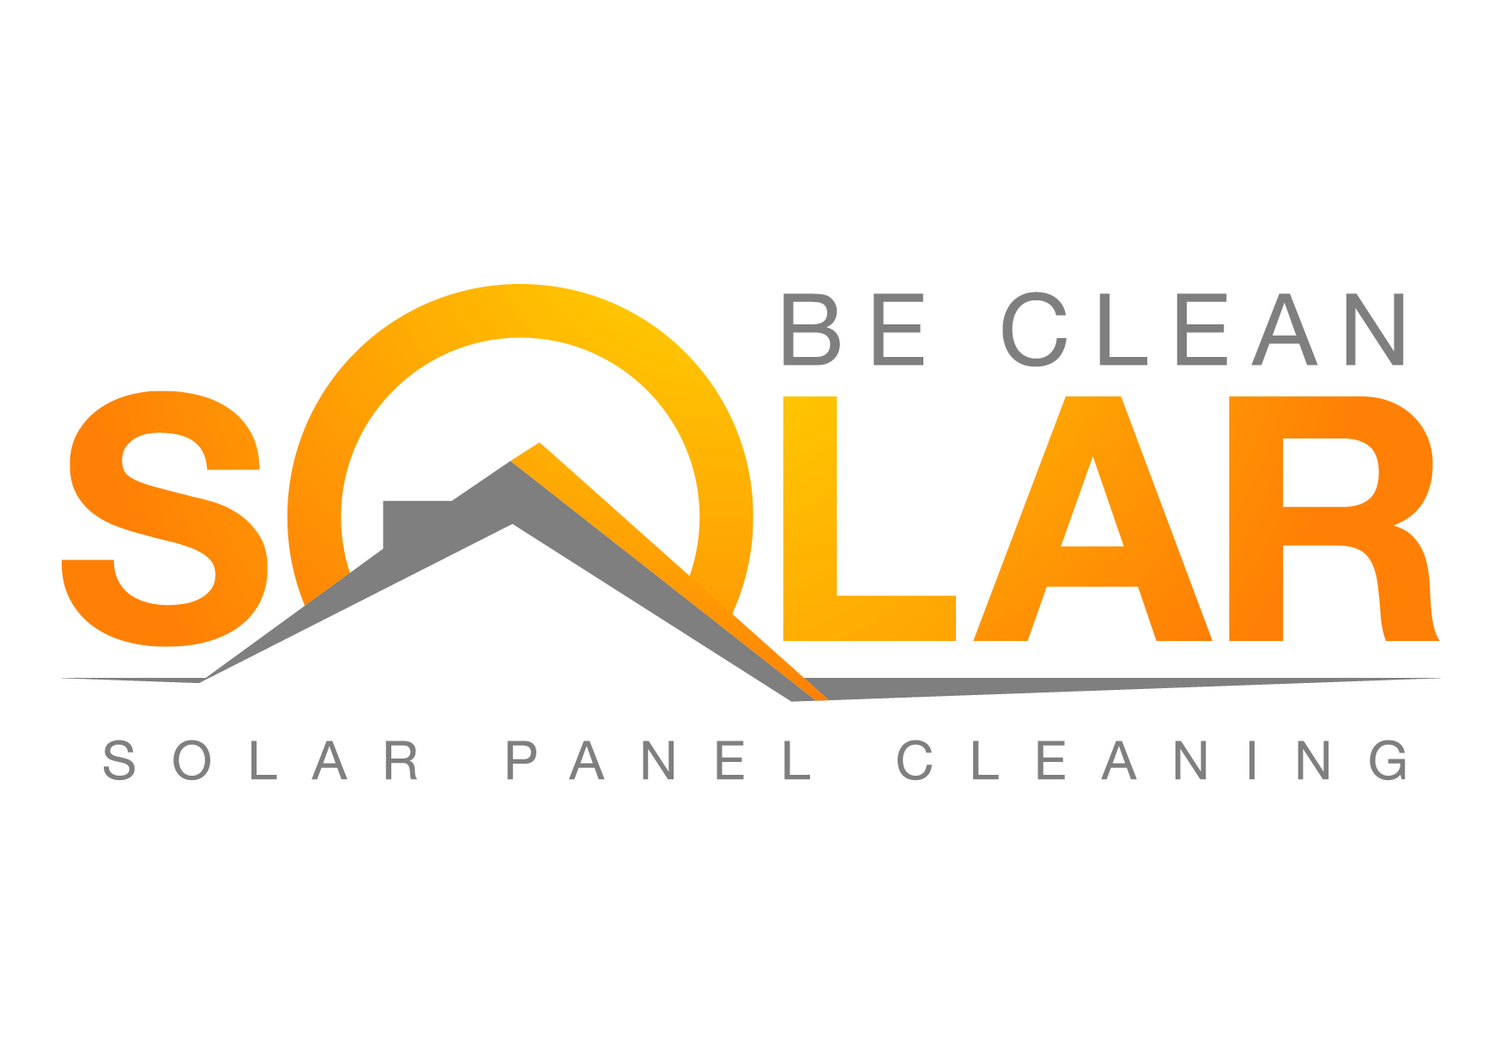 BeCleanSolar